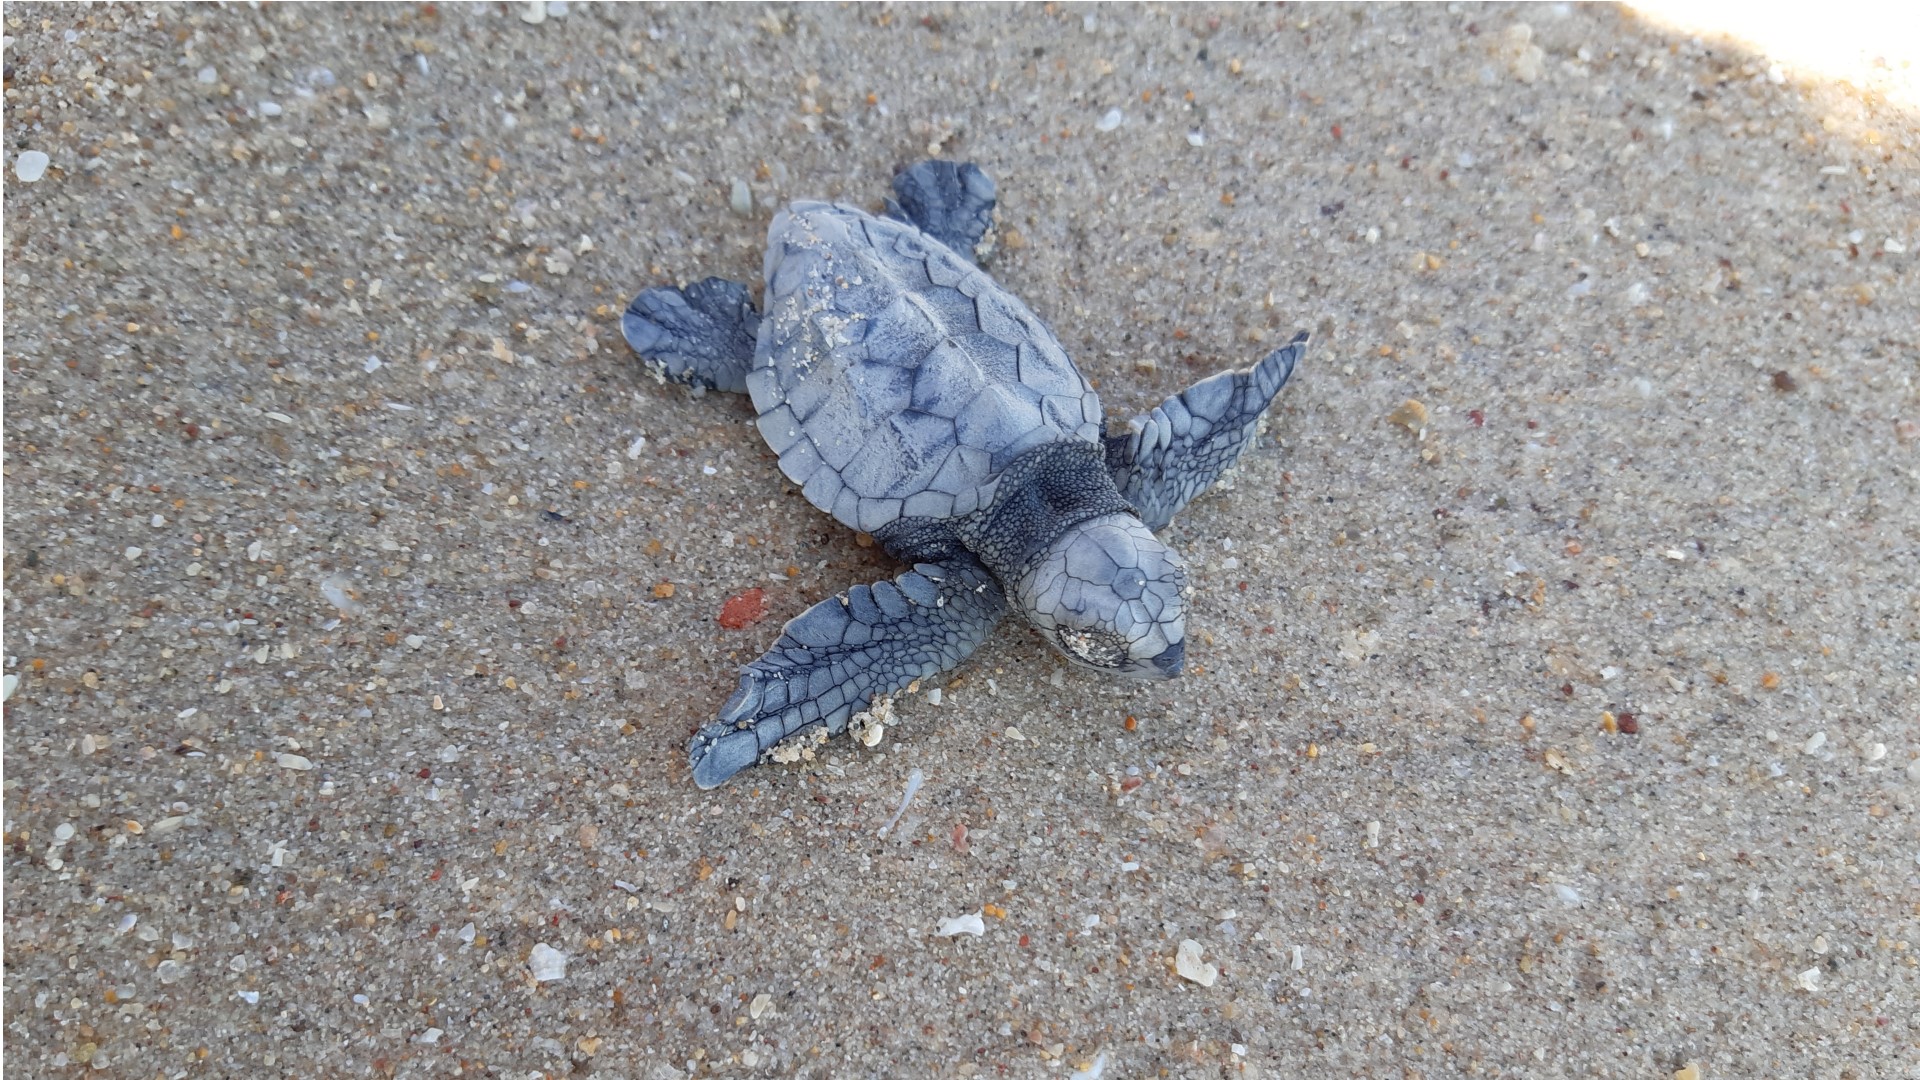 Green sea turtle hatchling, Weipa